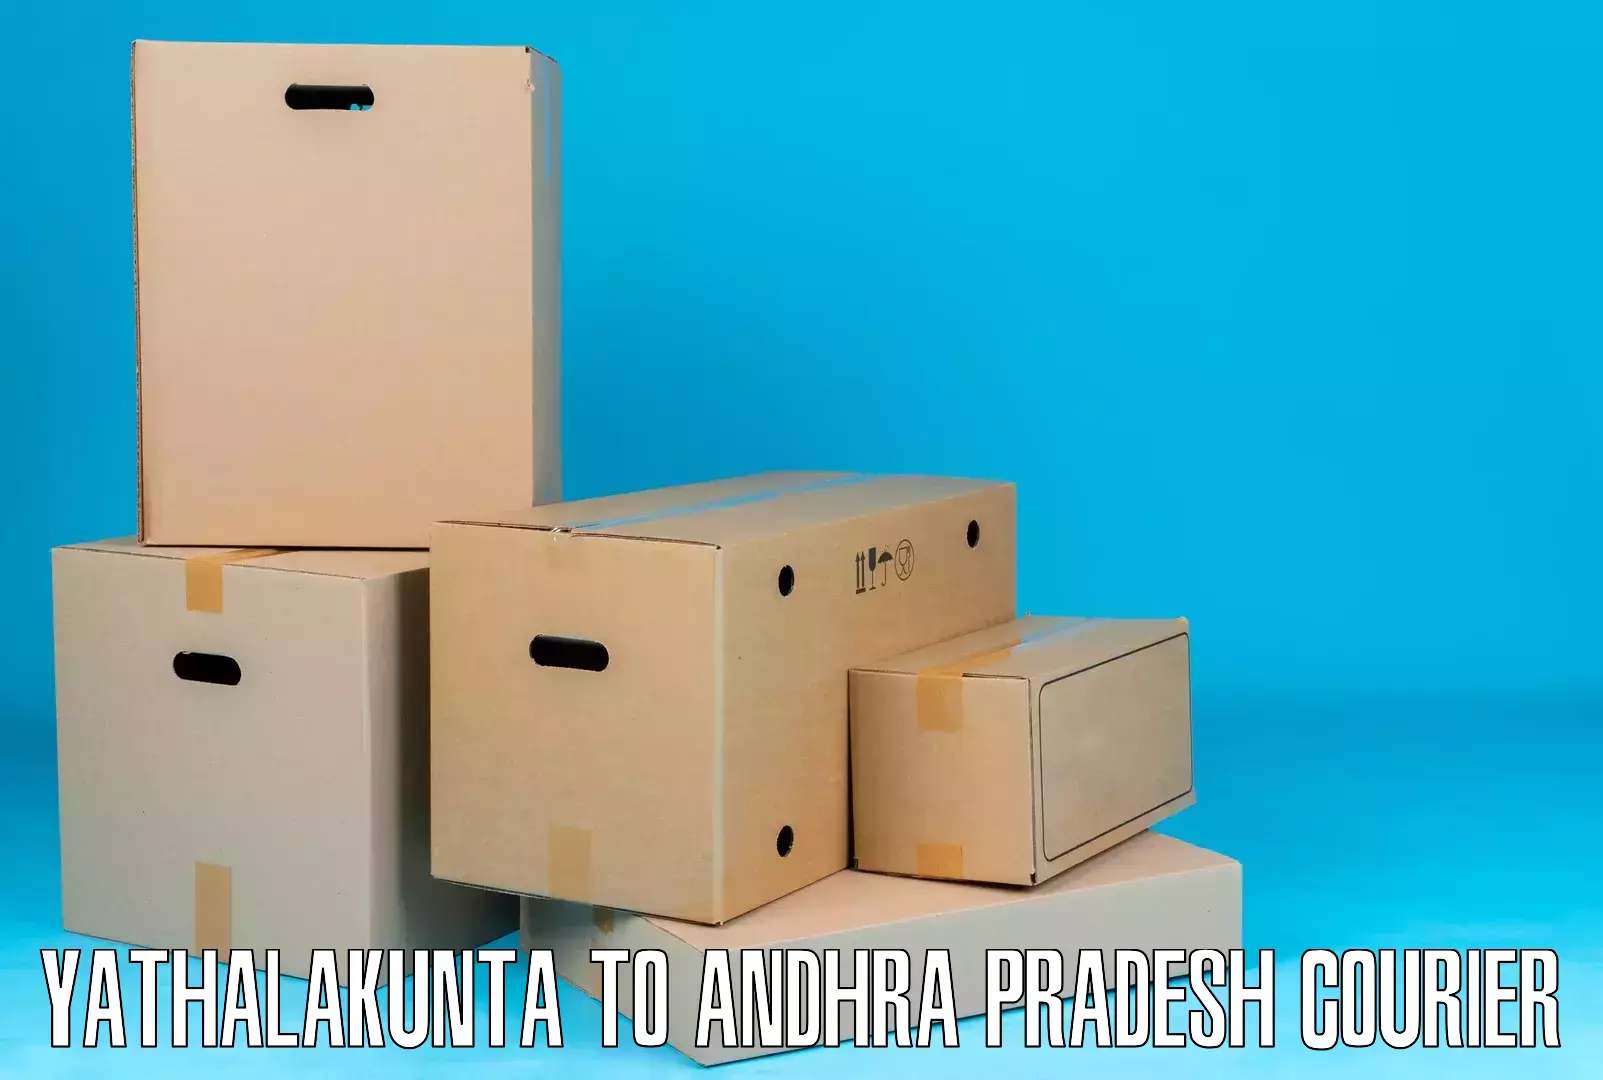 Overnight delivery services Yathalakunta to Gudur